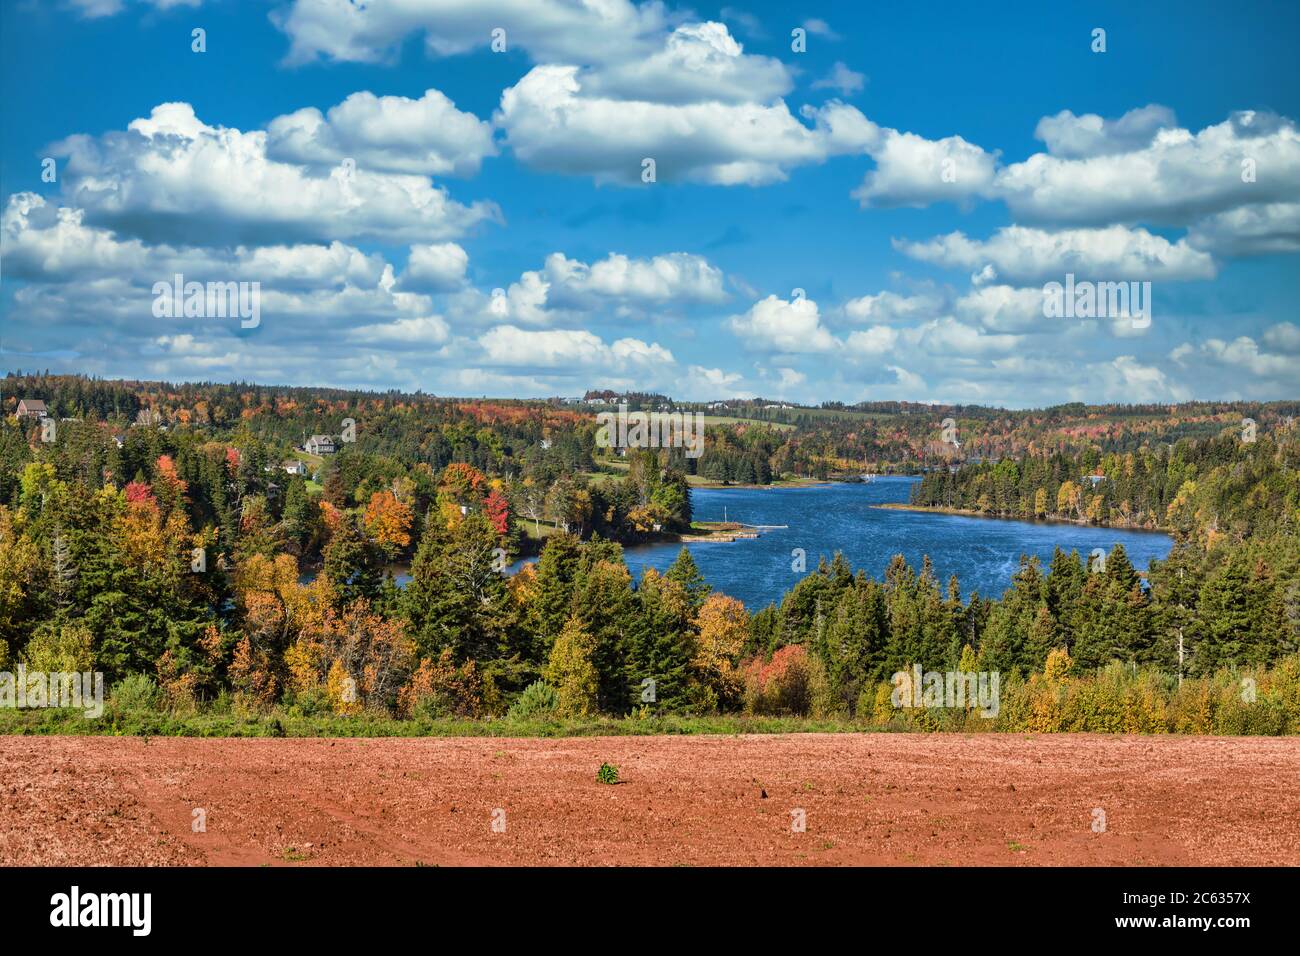 Farm field overlooking the Trout River in rural Prince Edward Island, Canada. Stock Photo